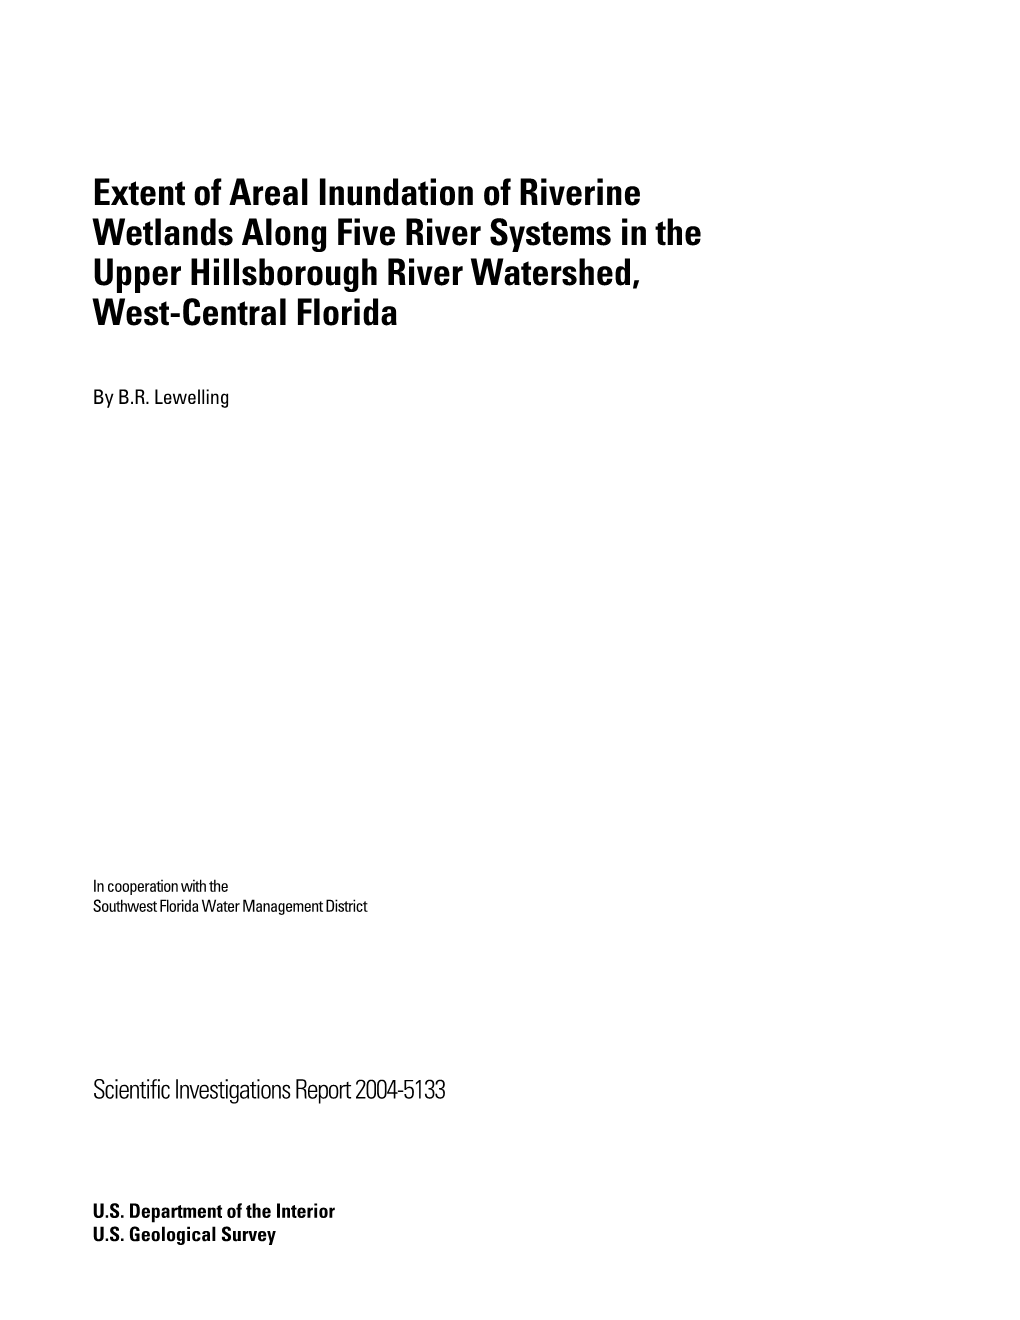 Extent of Areal Inundation of Riverine Wetlands Along Five River Systems in the Upper Hillsborough River Watershed, West-Central Florida